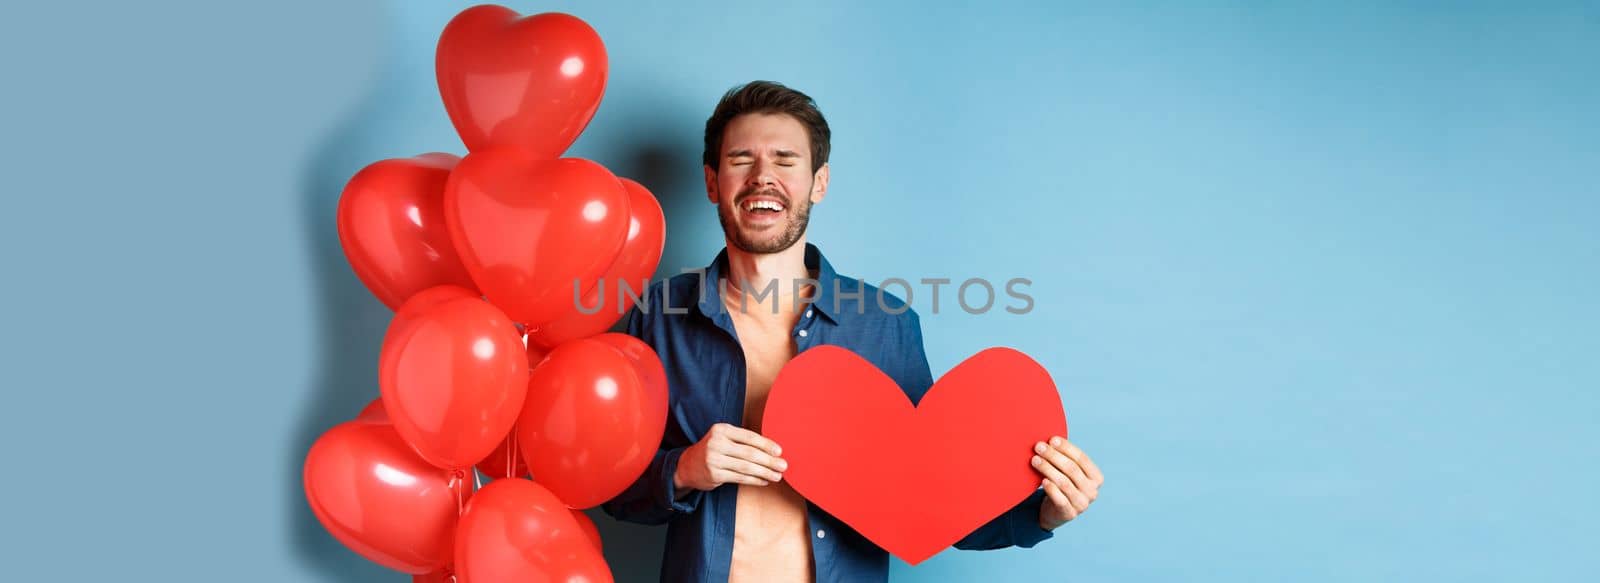 Heartbroken man crying of breakup of valentines day, holding red heart cutout and standing near romantic balloons over blue background by Benzoix